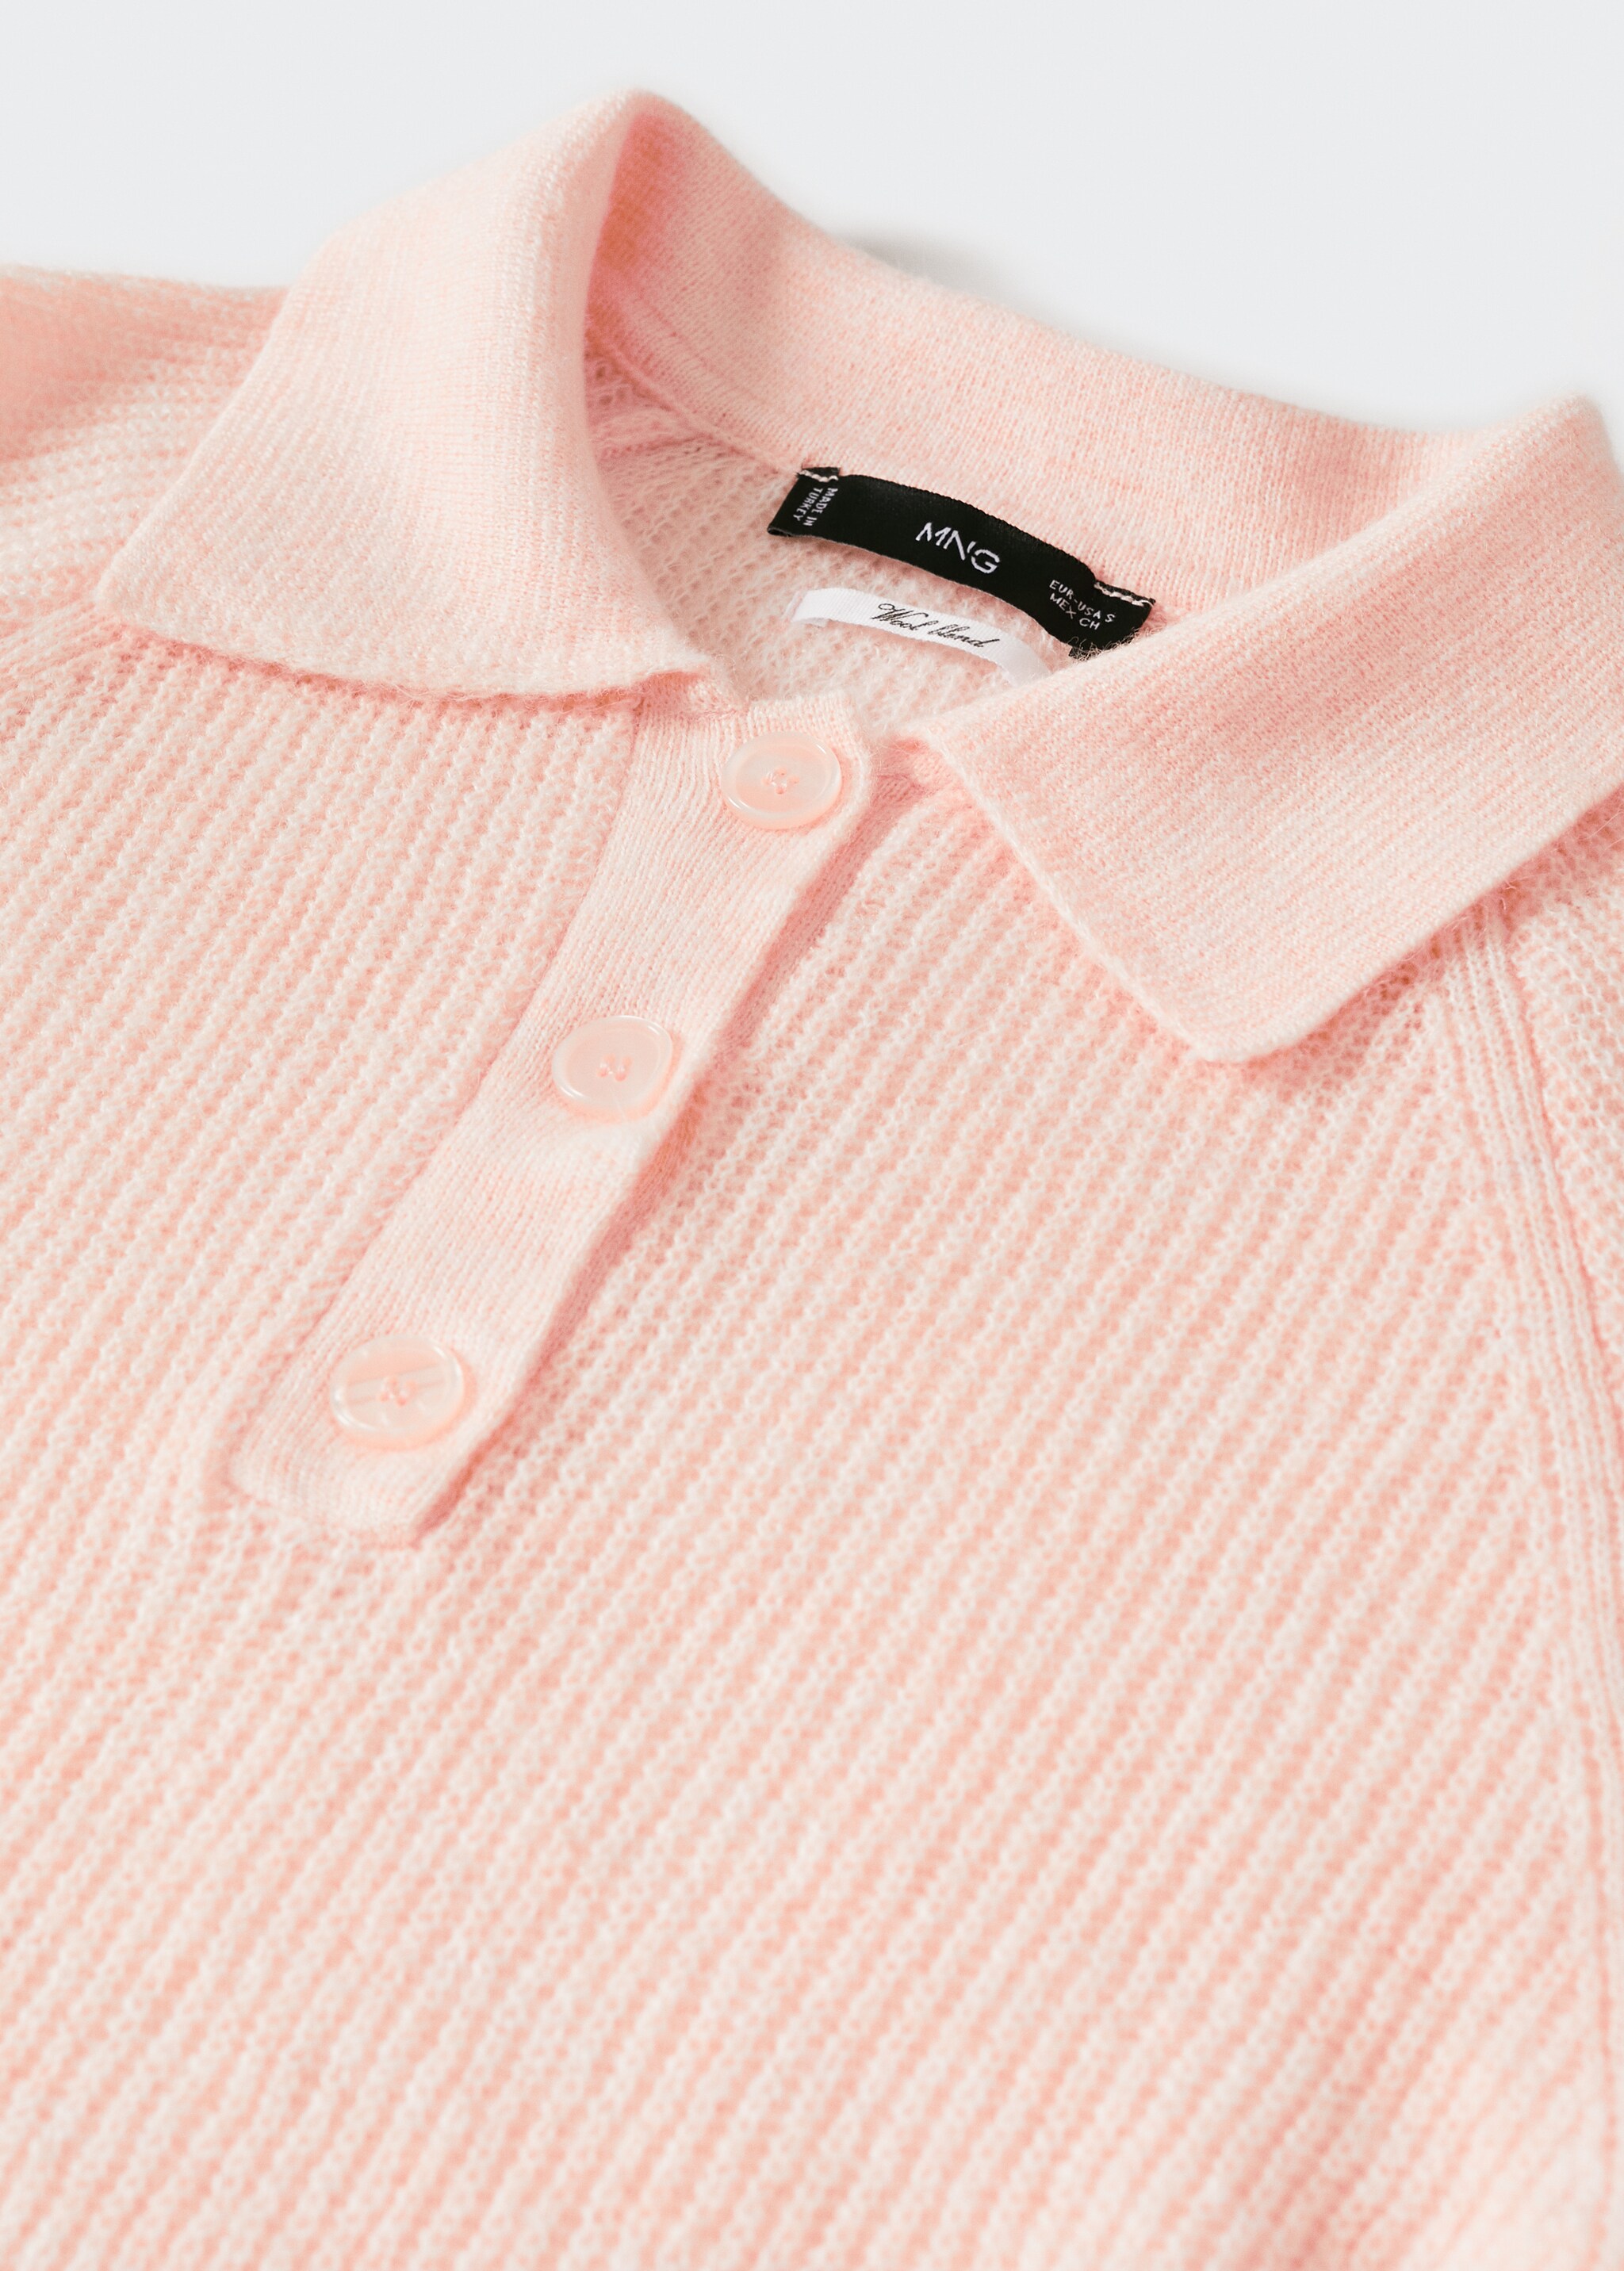 Polo style sweater - Details of the article 8